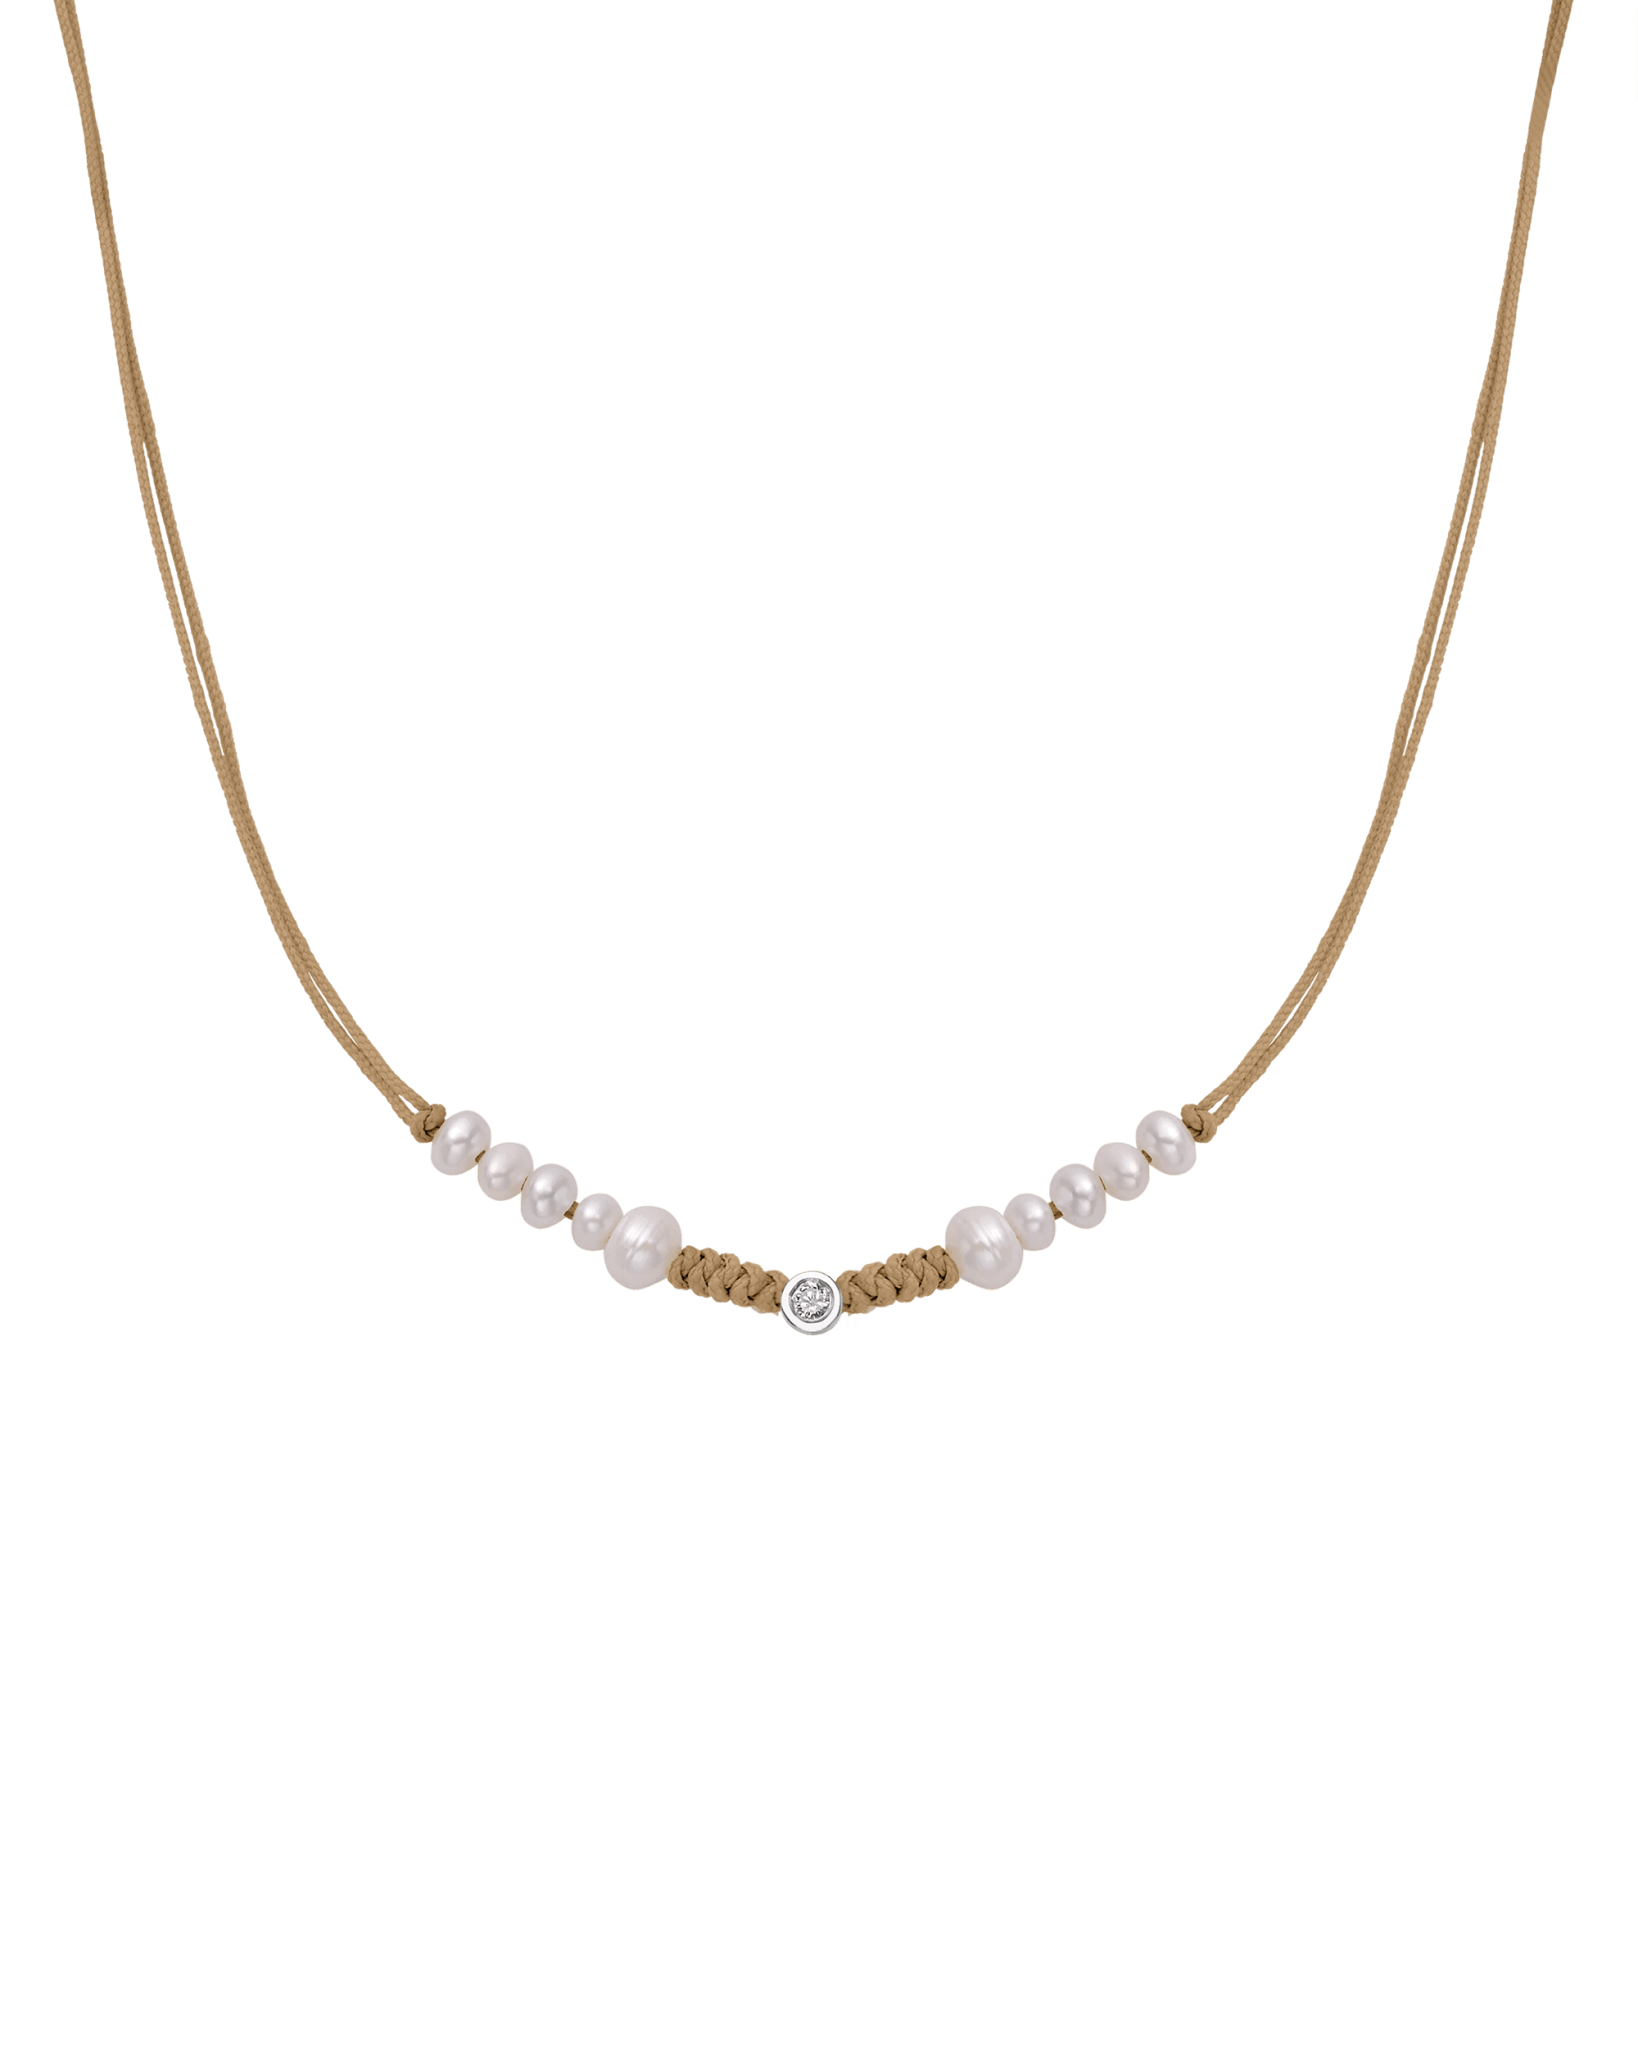 Ten Natural Pearl String of Love Necklace - 14K White Gold Necklaces 14K Solid Gold Camel Medium: 0.04ct 